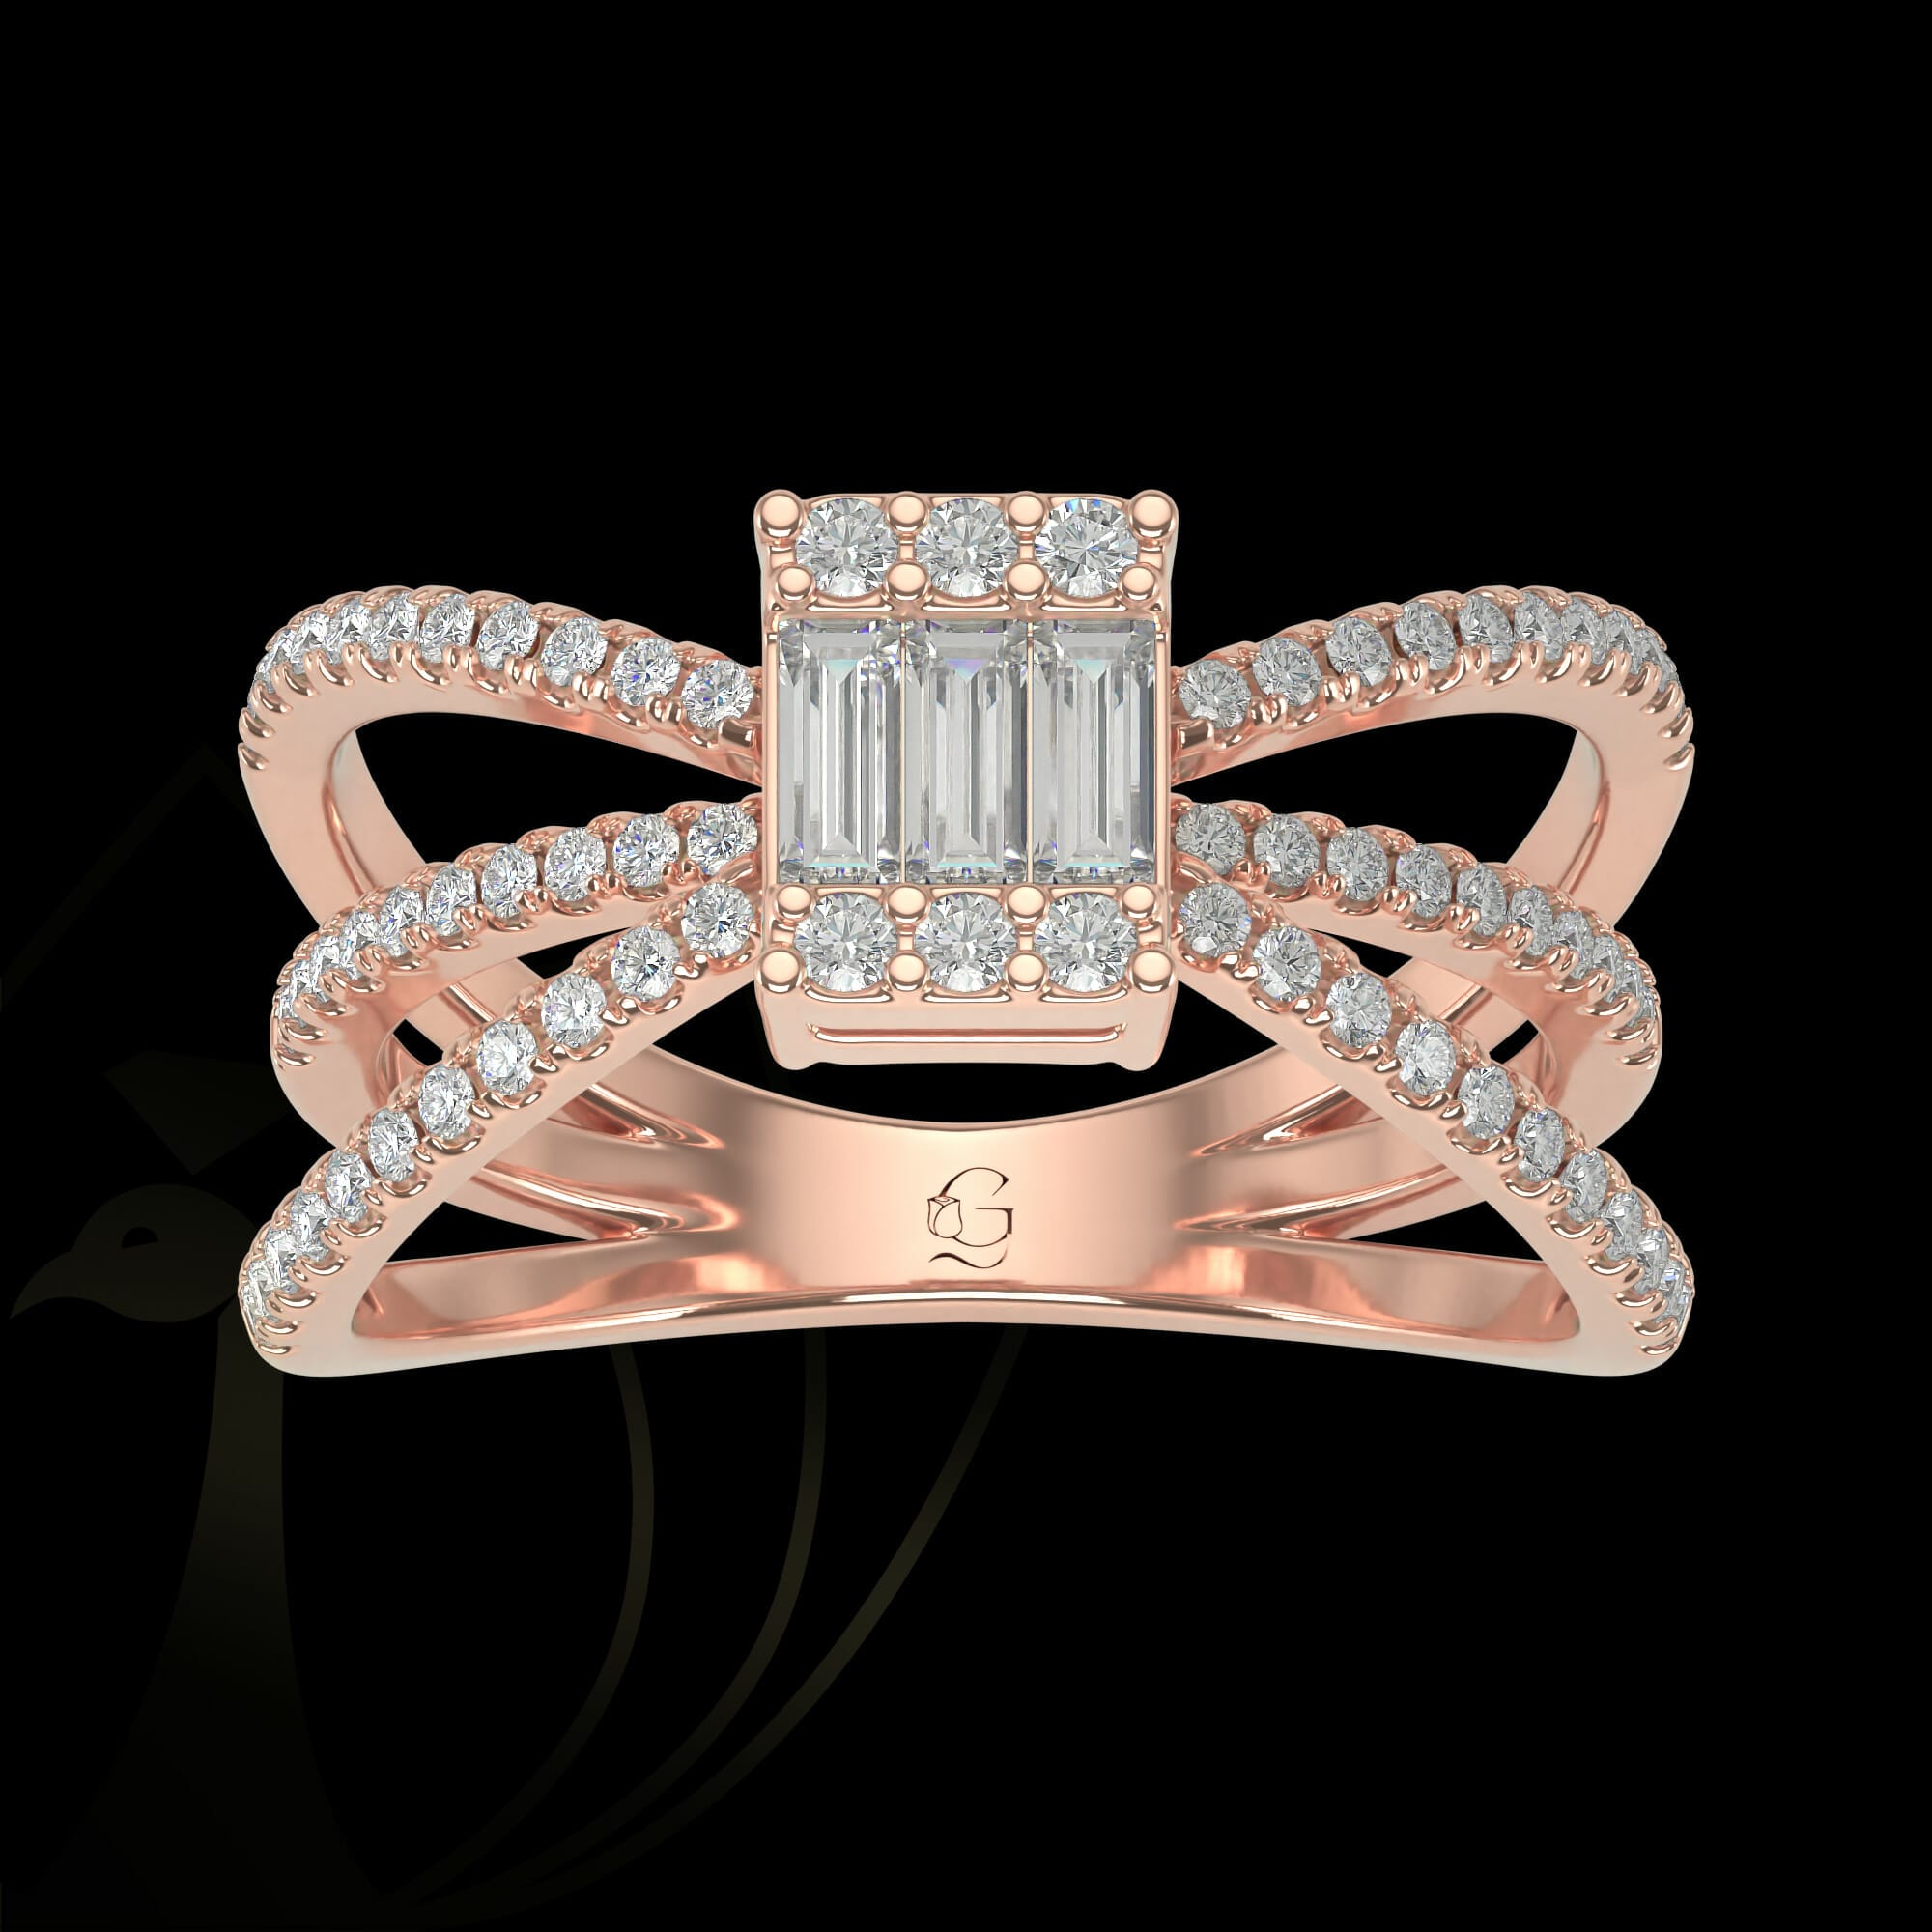 An effervescent radiance diamond ring in rose gold.